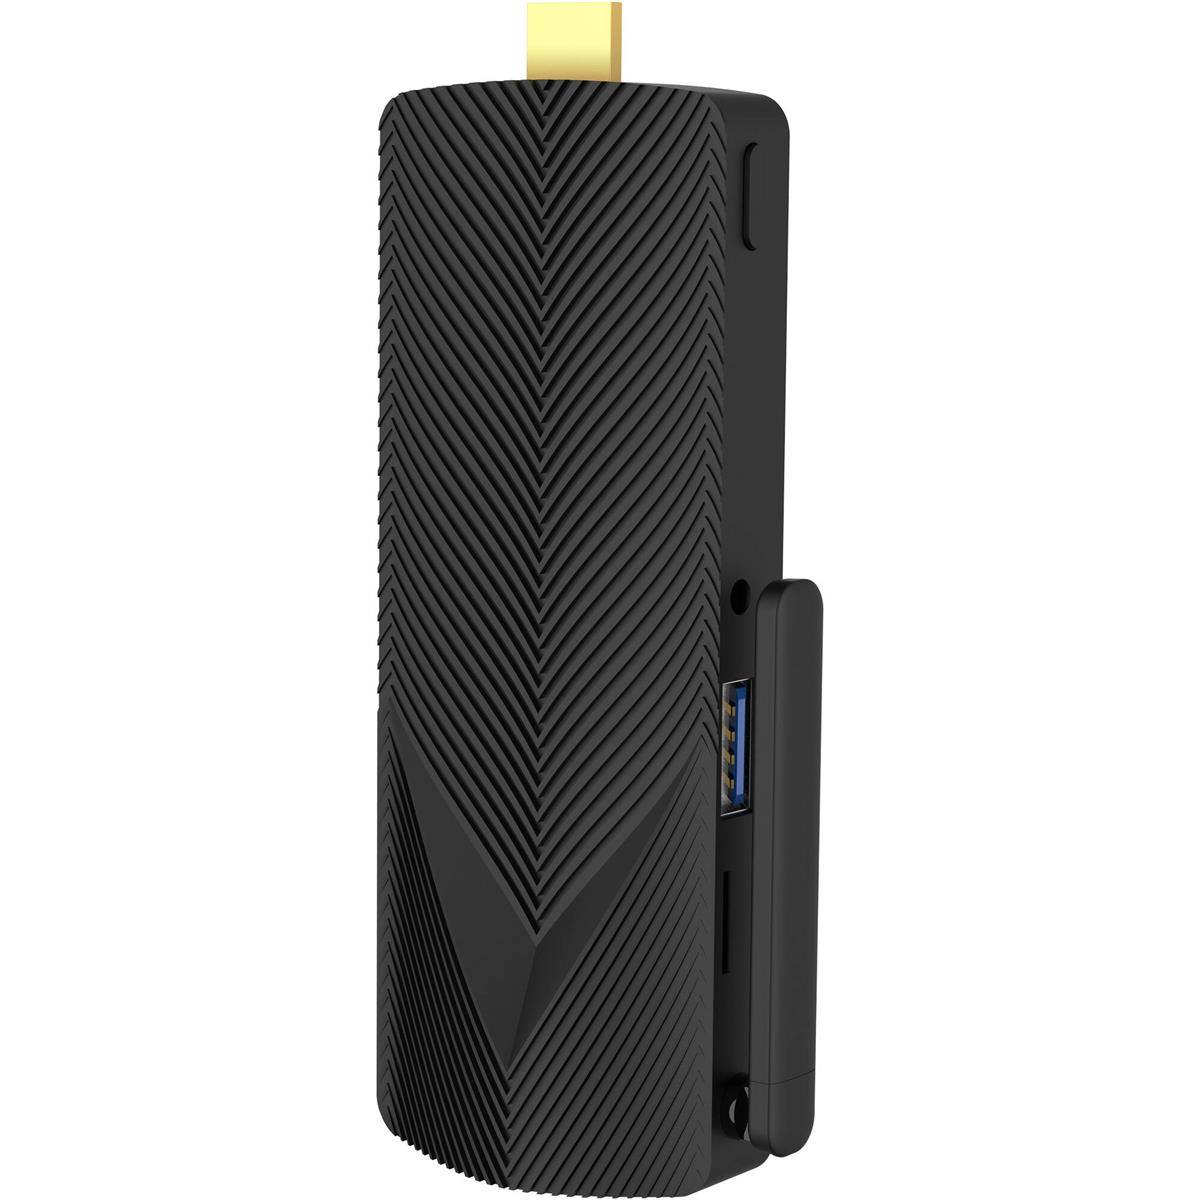 Image of Azulle Access4 Essential Fanless Mini PC Stick